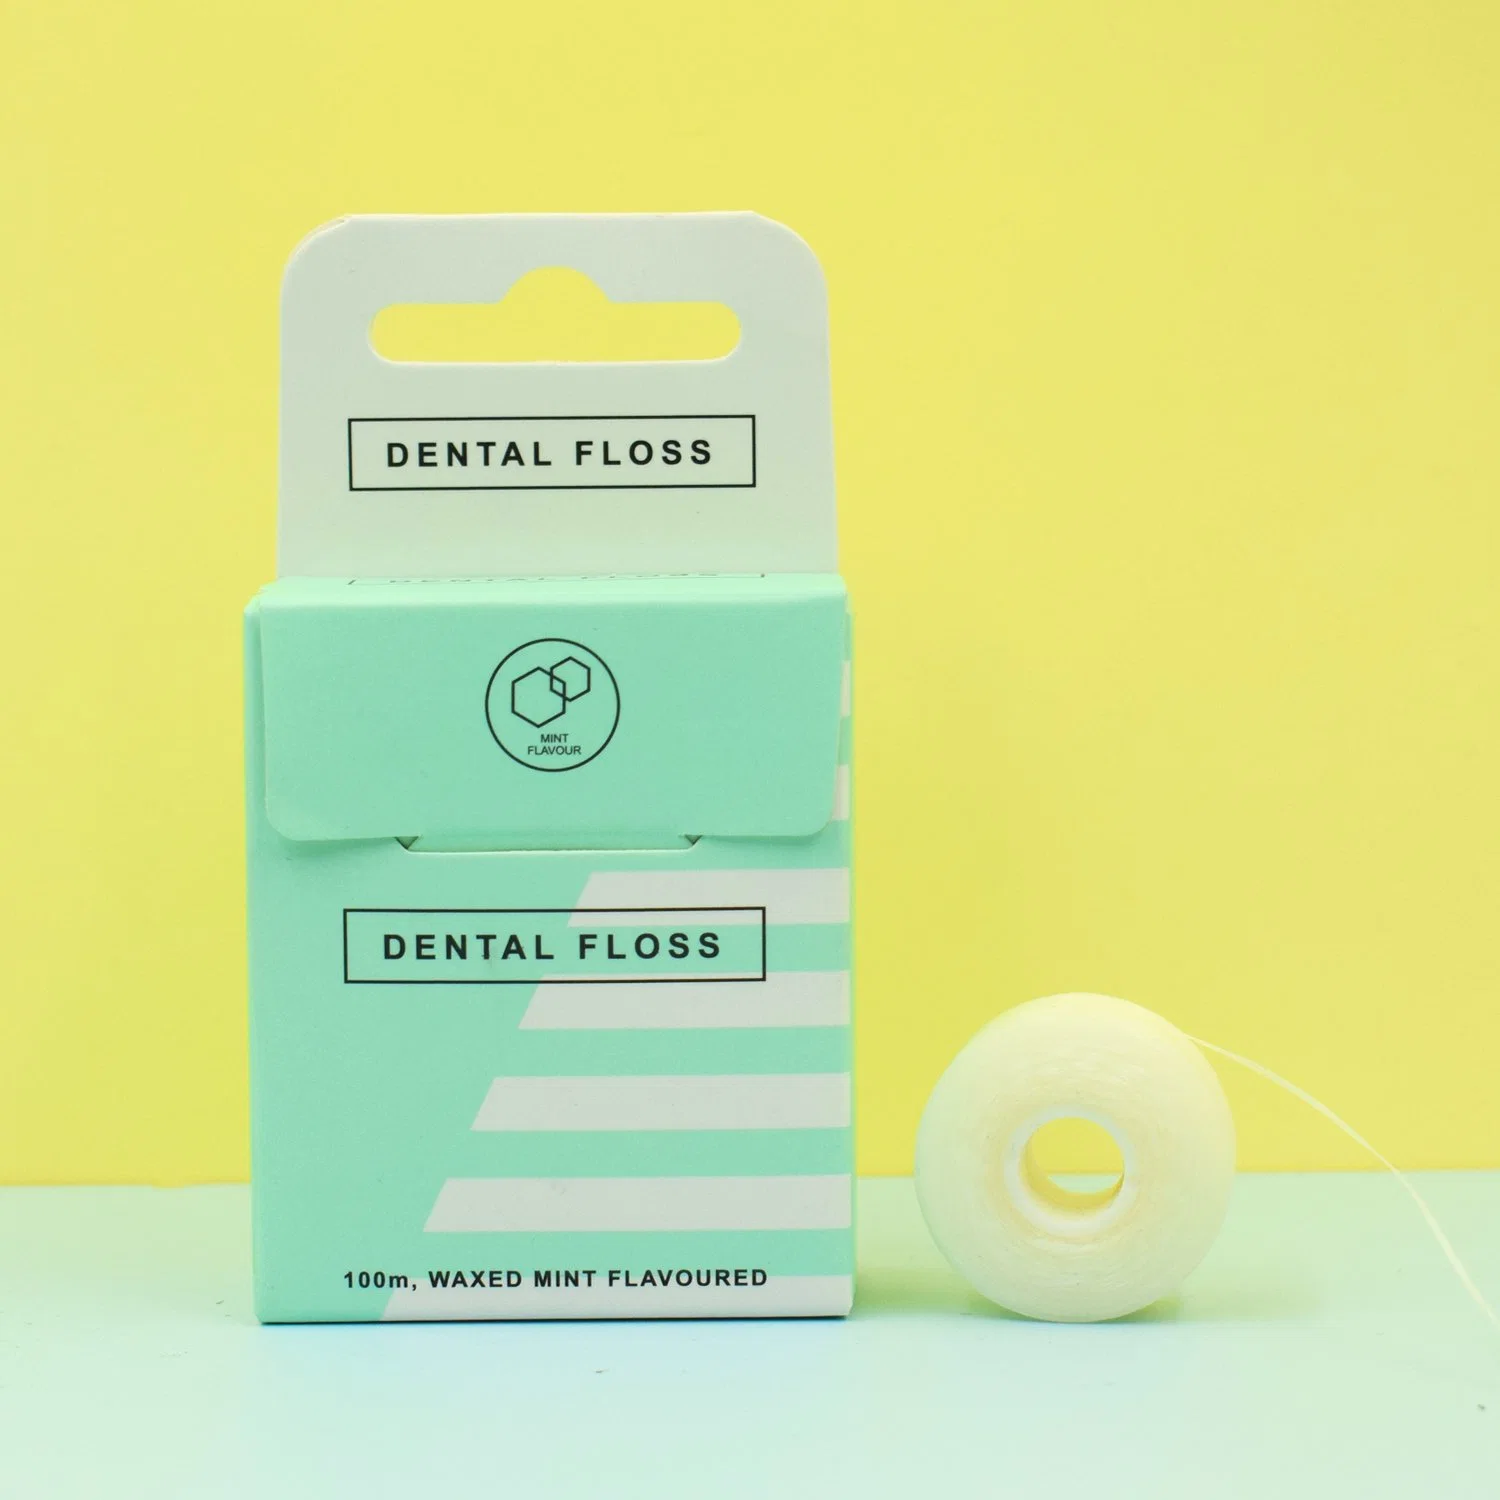 Eco-friendly 100m Wax Floss with Natural Mint Flavoring Dental Floss